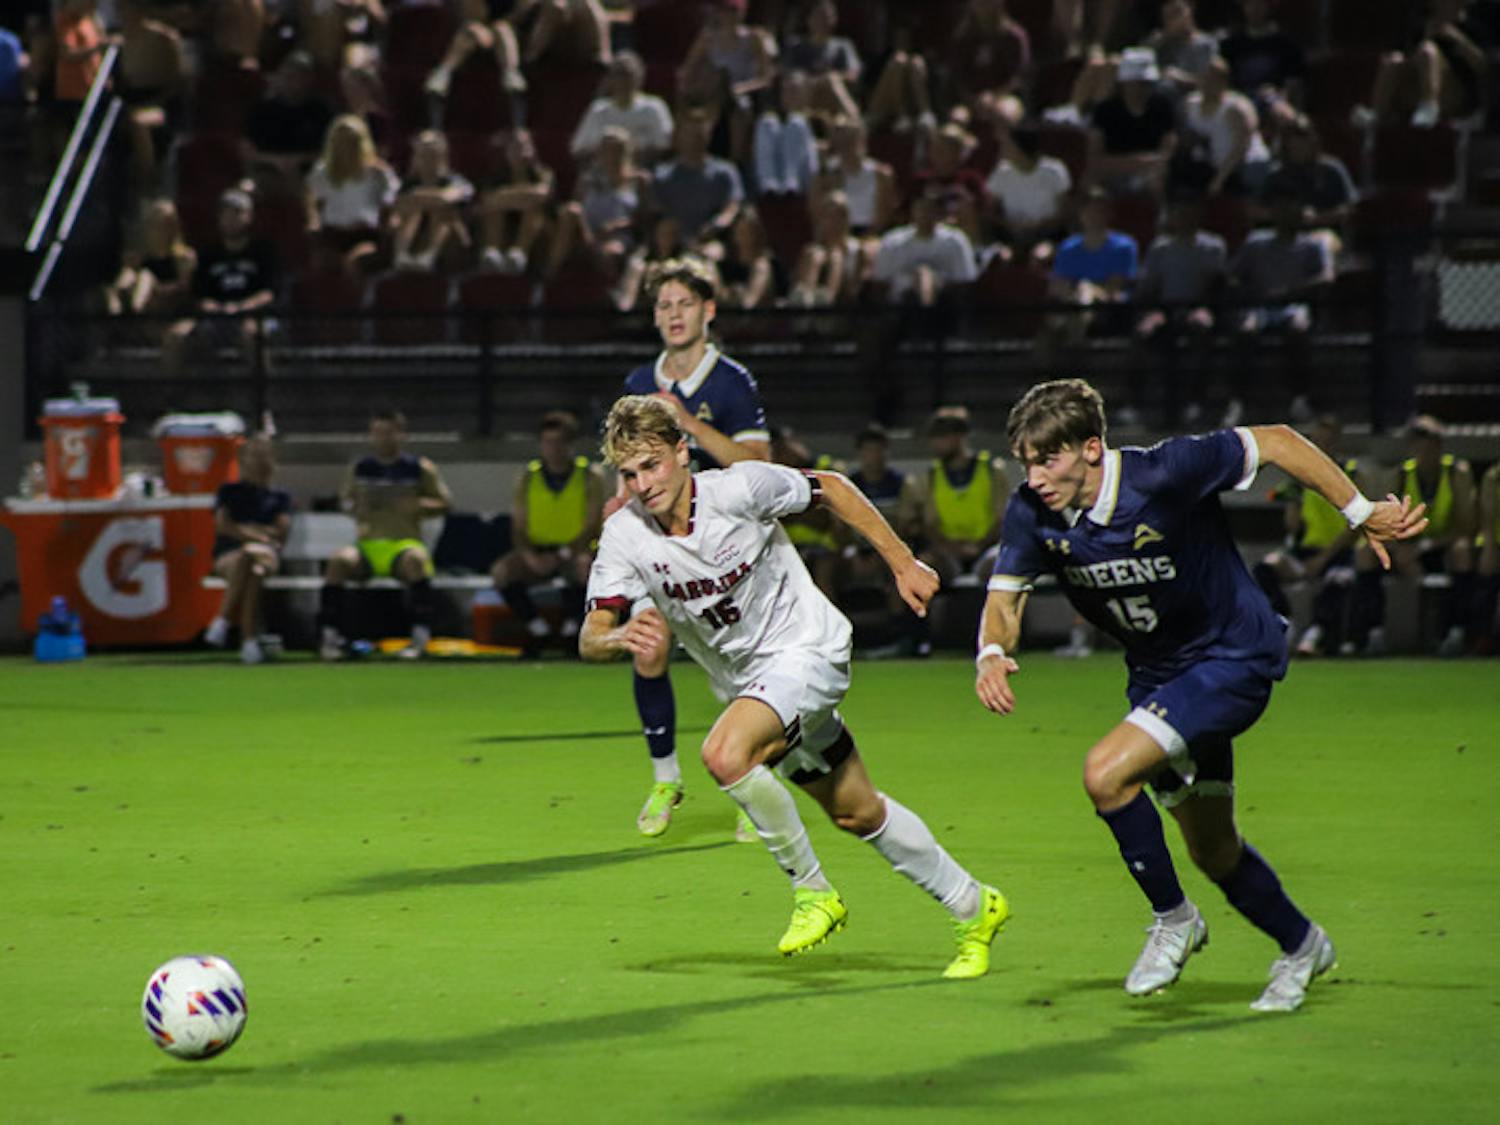 Freshman Midfielder Christiano Bruletti (on left) races Queens graduate student Caleb Patsch (on right) for the ball during the Gamecocks' match against the Royals on Sept. 20, 2022. South Carolina beat Queens 3-1.